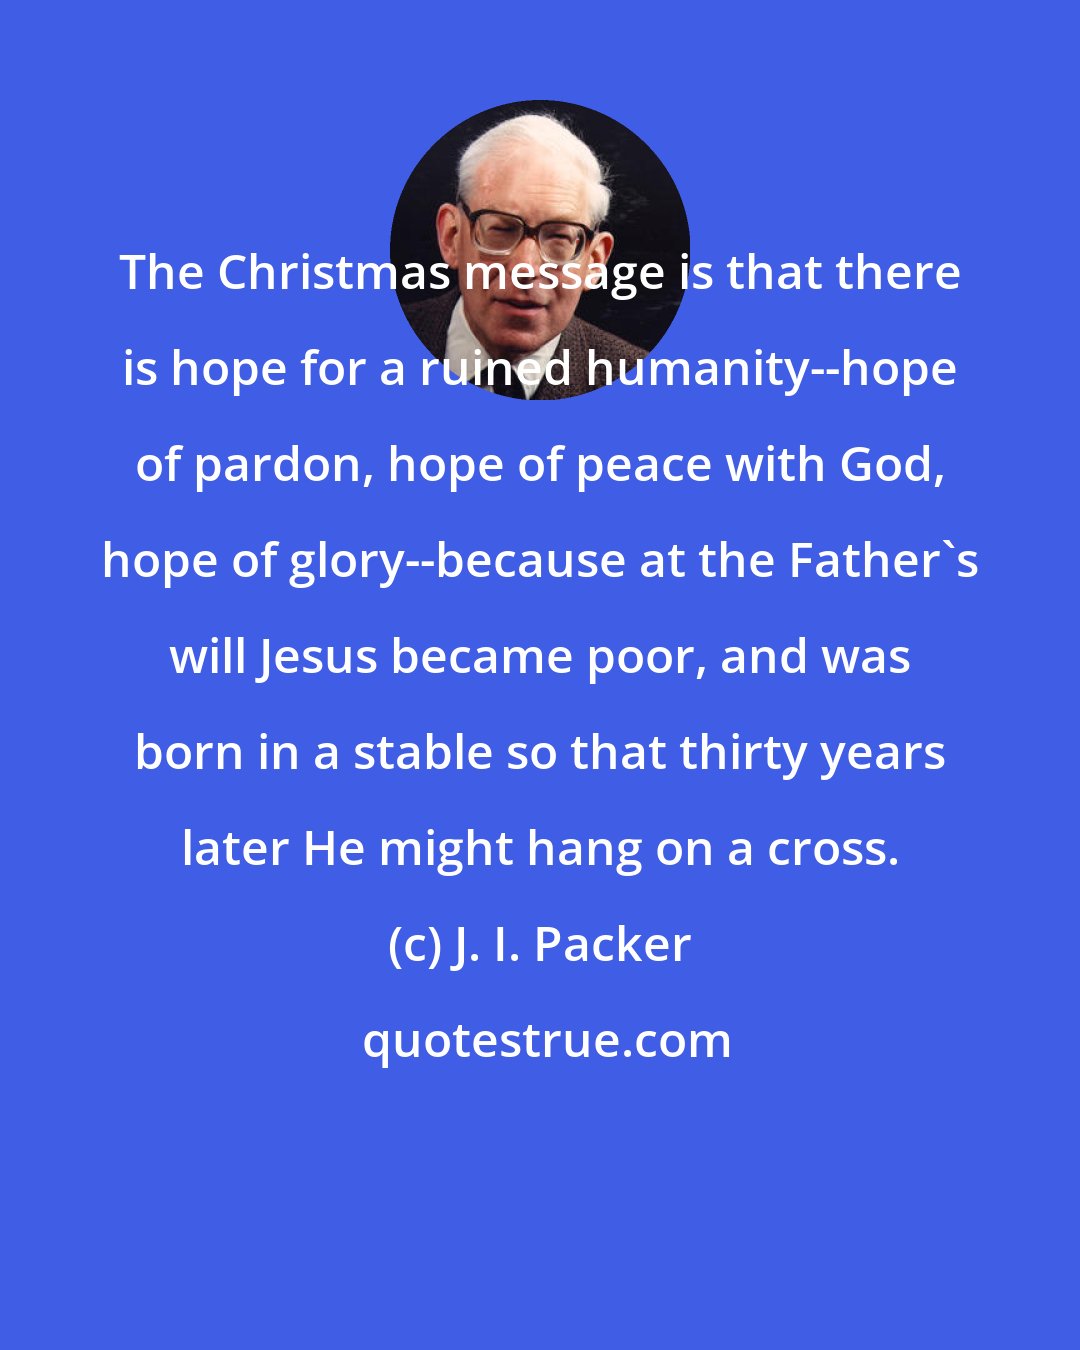 J. I. Packer: The Christmas message is that there is hope for a ruined humanity--hope of pardon, hope of peace with God, hope of glory--because at the Father's will Jesus became poor, and was born in a stable so that thirty years later He might hang on a cross.